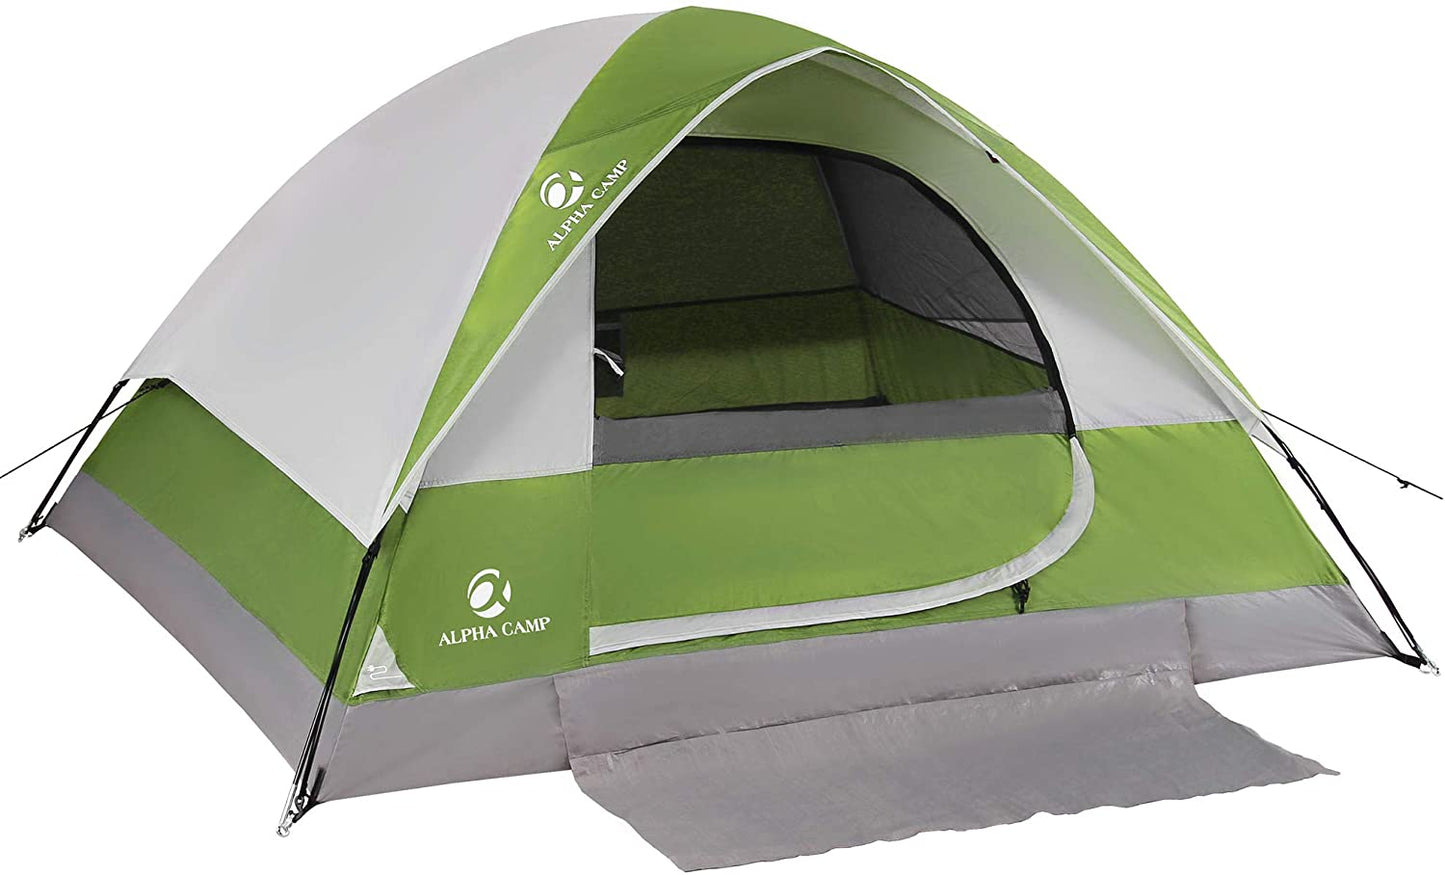 Sophia & William 2 Person Outdoor Camping Dome Tent Portable Waterproof Lightweight Backpacking Tent with Carry Bag for Outdoor Camping/Hiking,Green